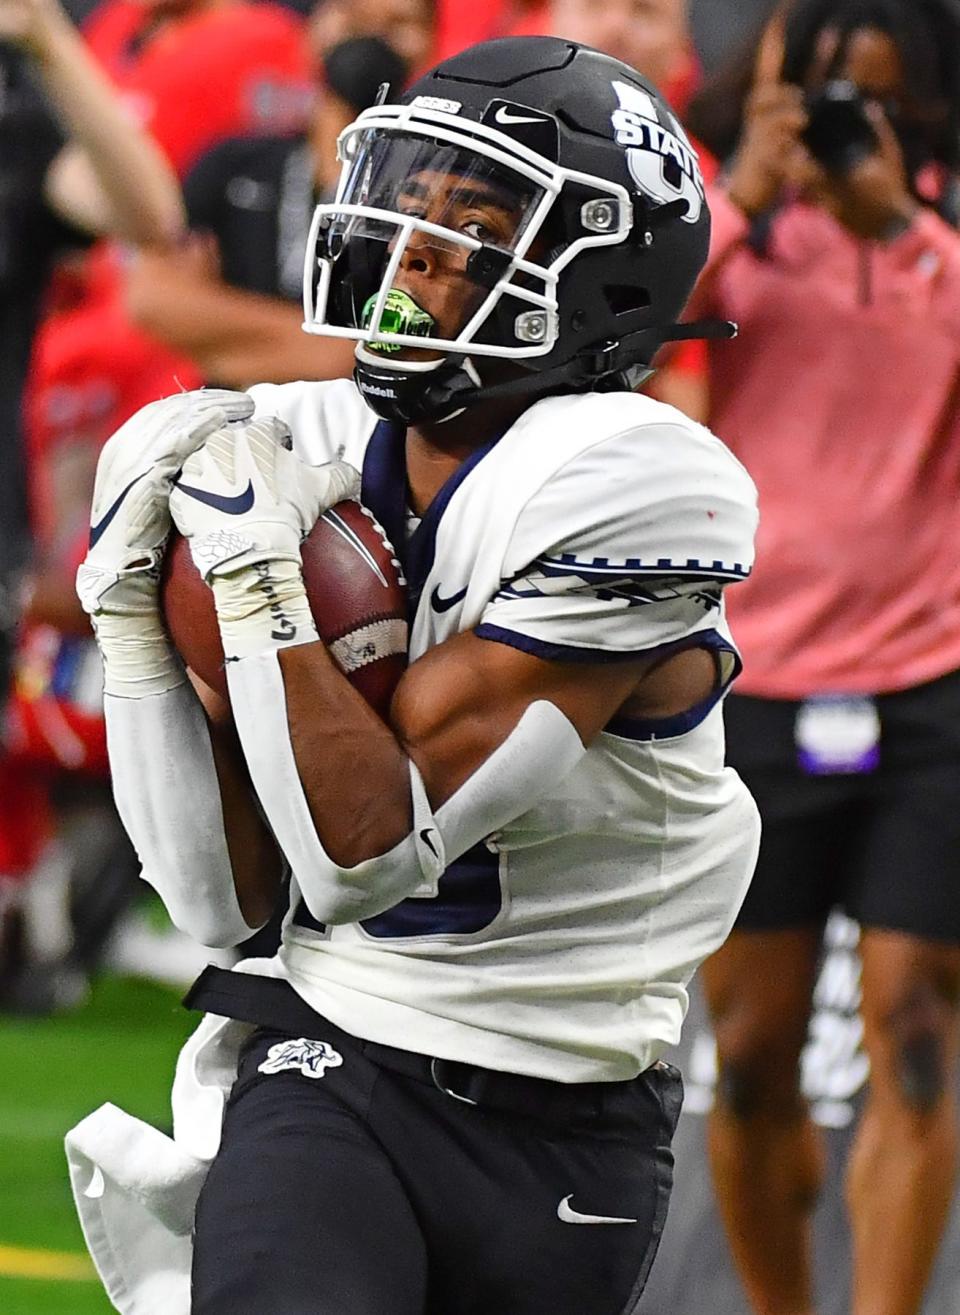 Oct 16, 2021; Paradise, Nevada, USA;  Utah State Aggies wide receiver Deven Thompkins (13) eyes the end zone after making a 37-yard reception against the UNLV Rebels at Allegiant Stadium. Mandatory Credit: Stephen R. Sylvanie-USA TODAY Sports